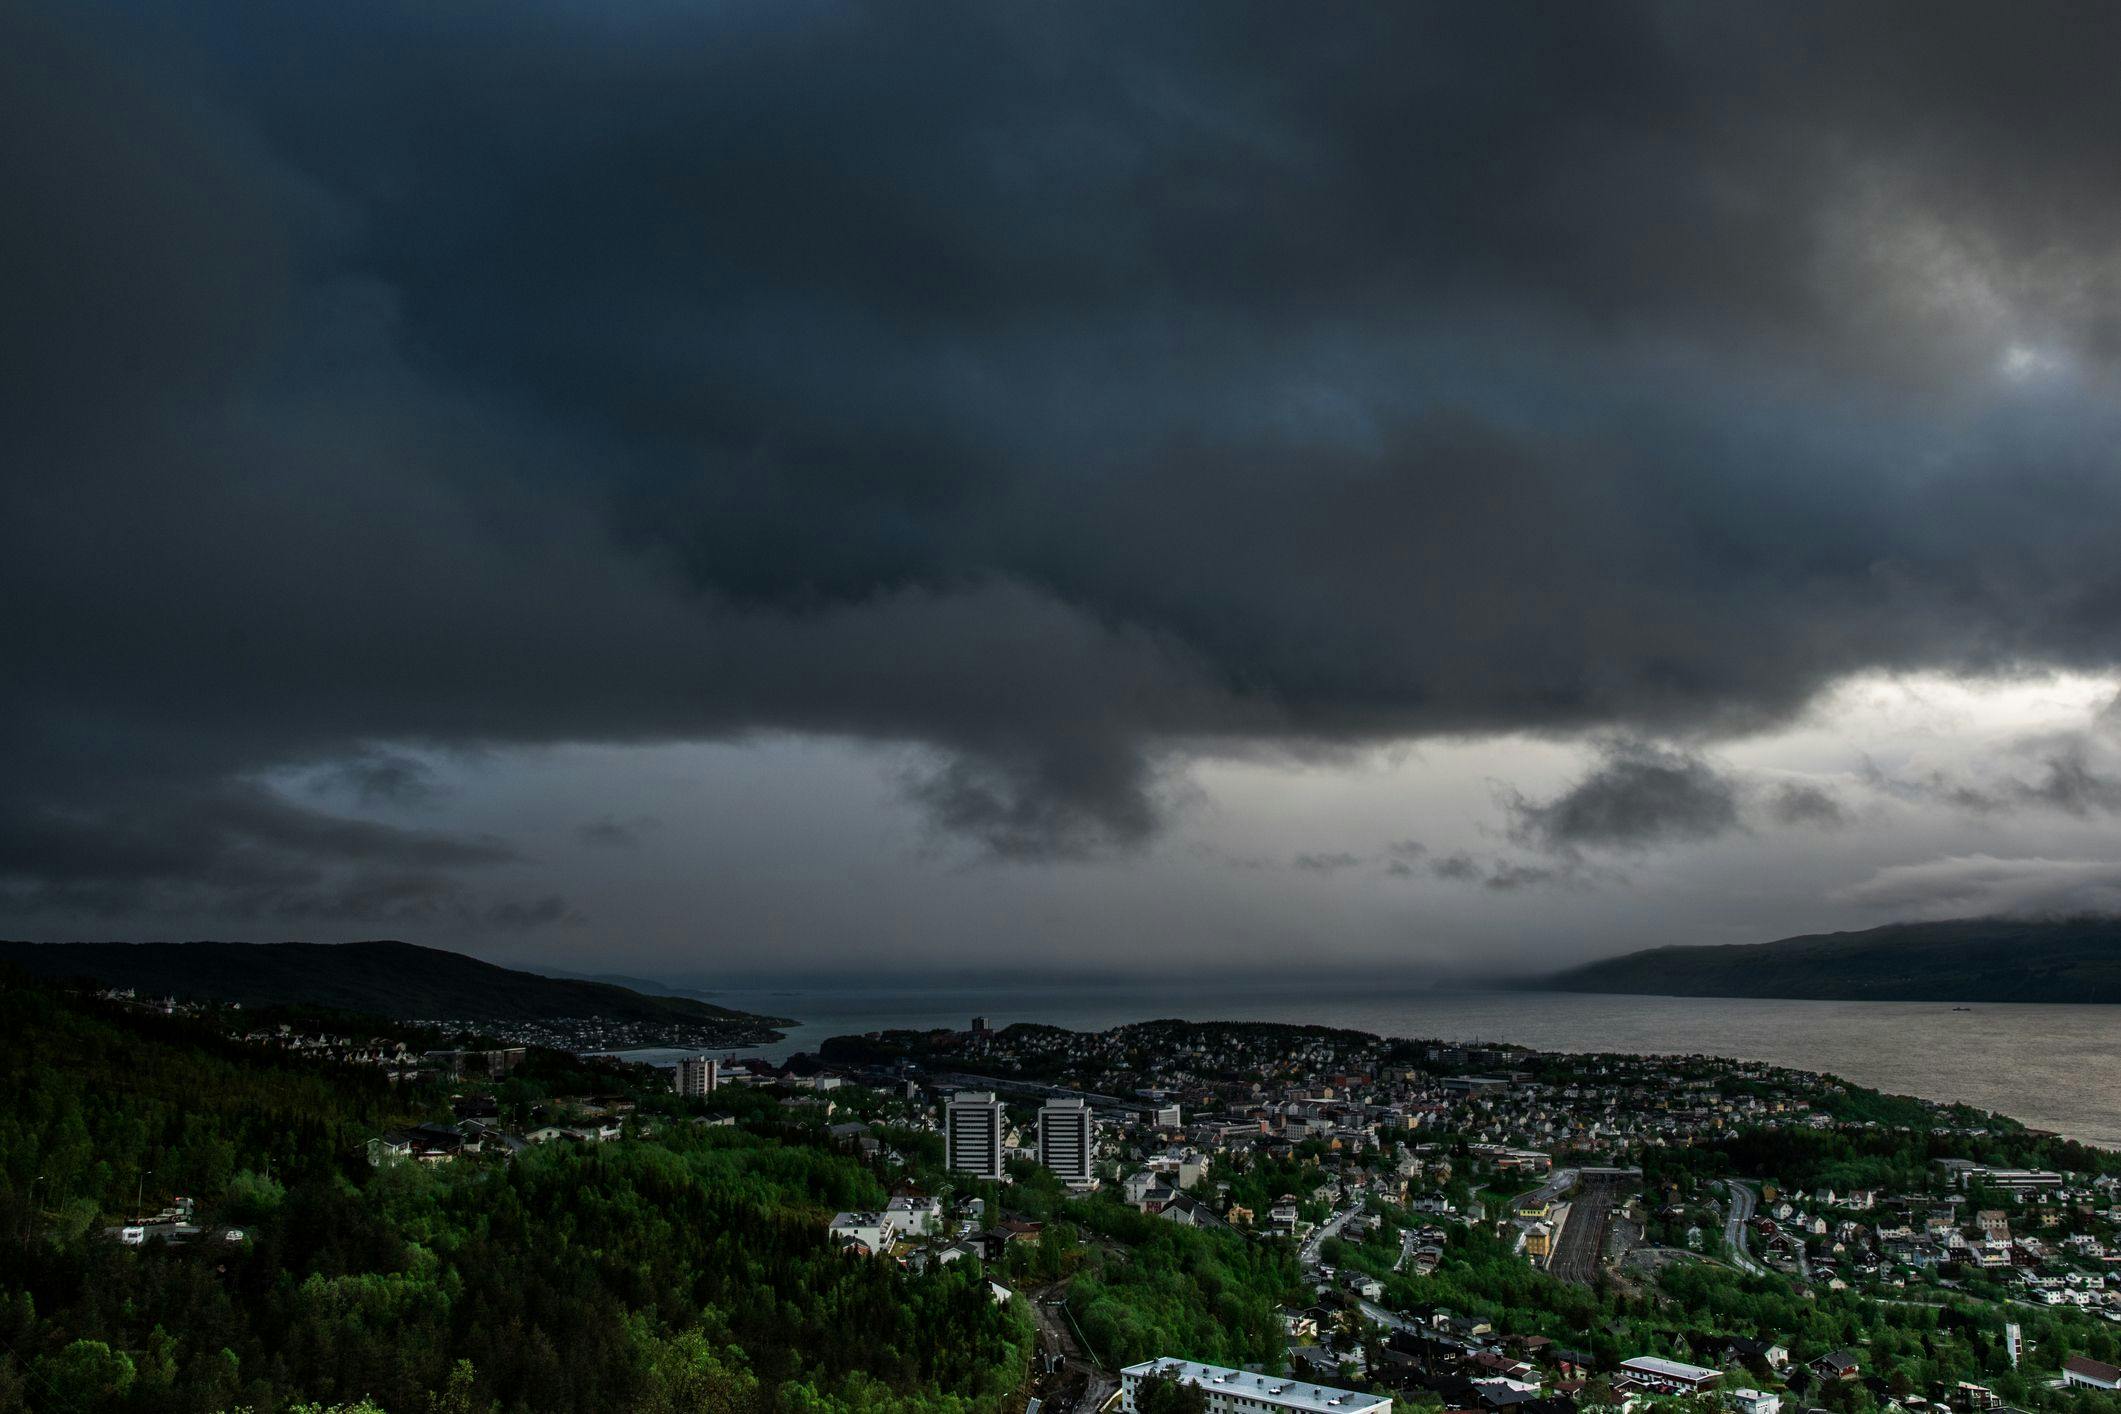 From a viewpoint, we look out over Narvik; it’s gray and dark with heavy clouds over the city.